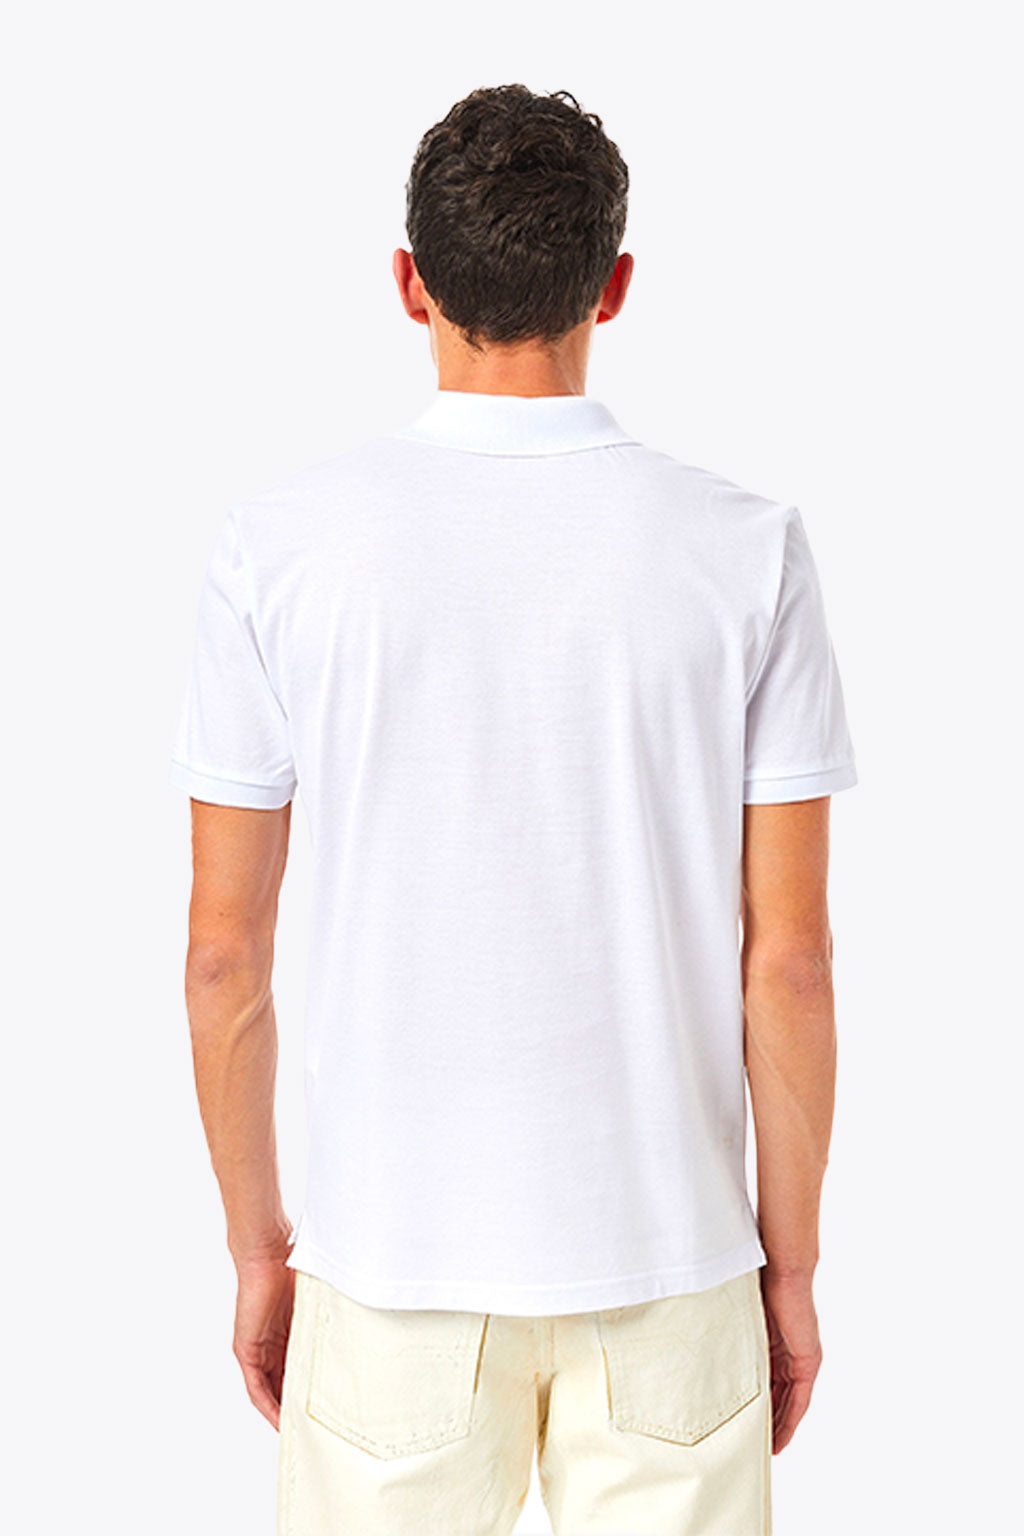 alt-image__White-polo-shirt-with-Oval-D-logo-patch---T-Smith-Doval-Pj
